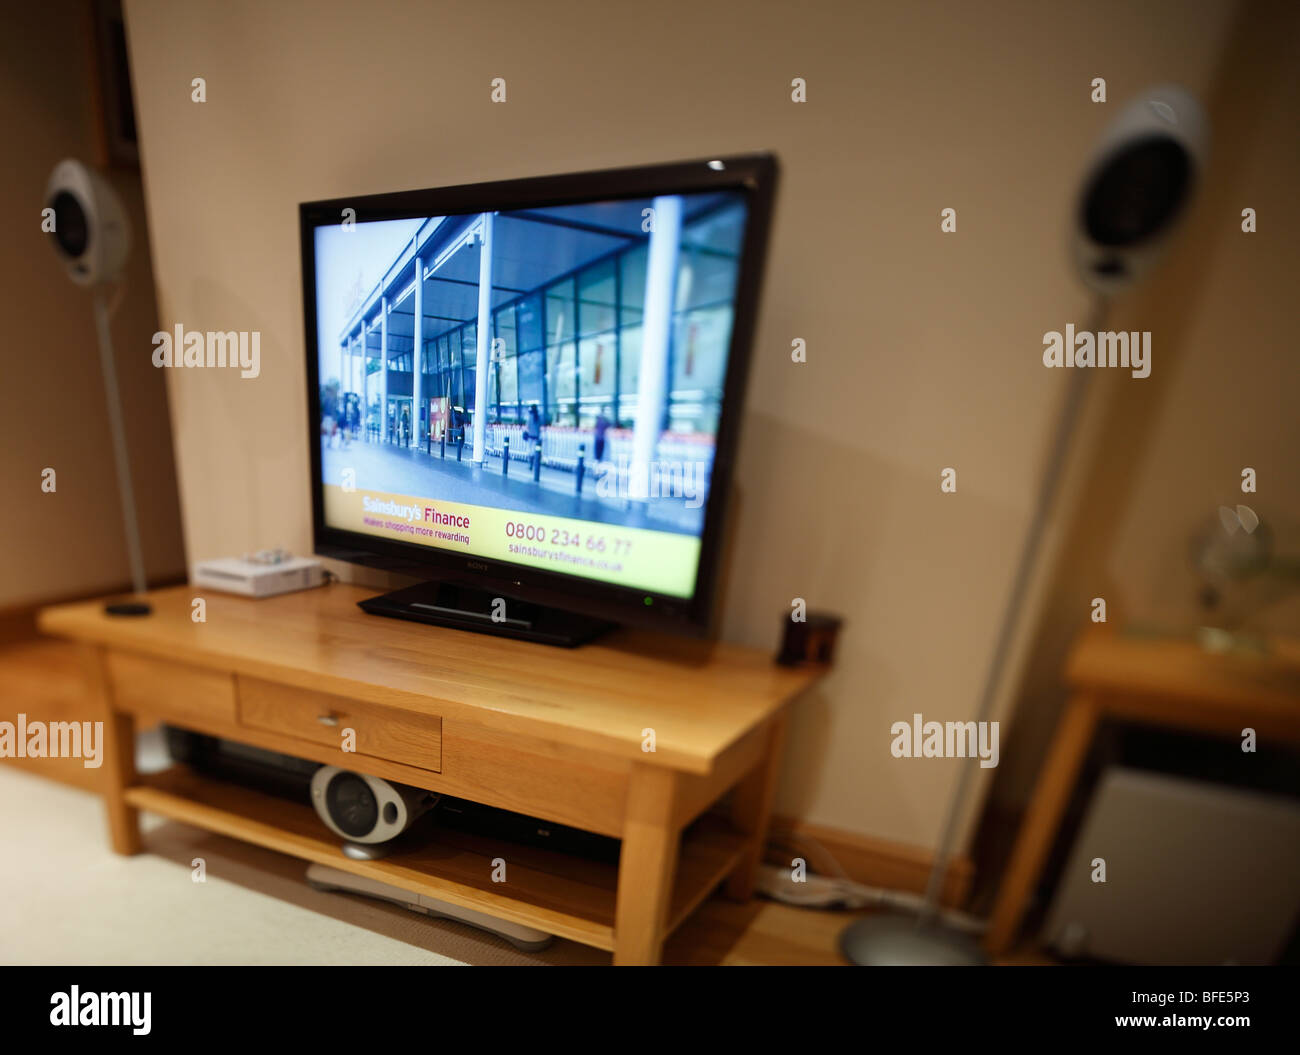 Flat screen TV with surround sound. (note: image has a shallow depth of field). Stock Photo